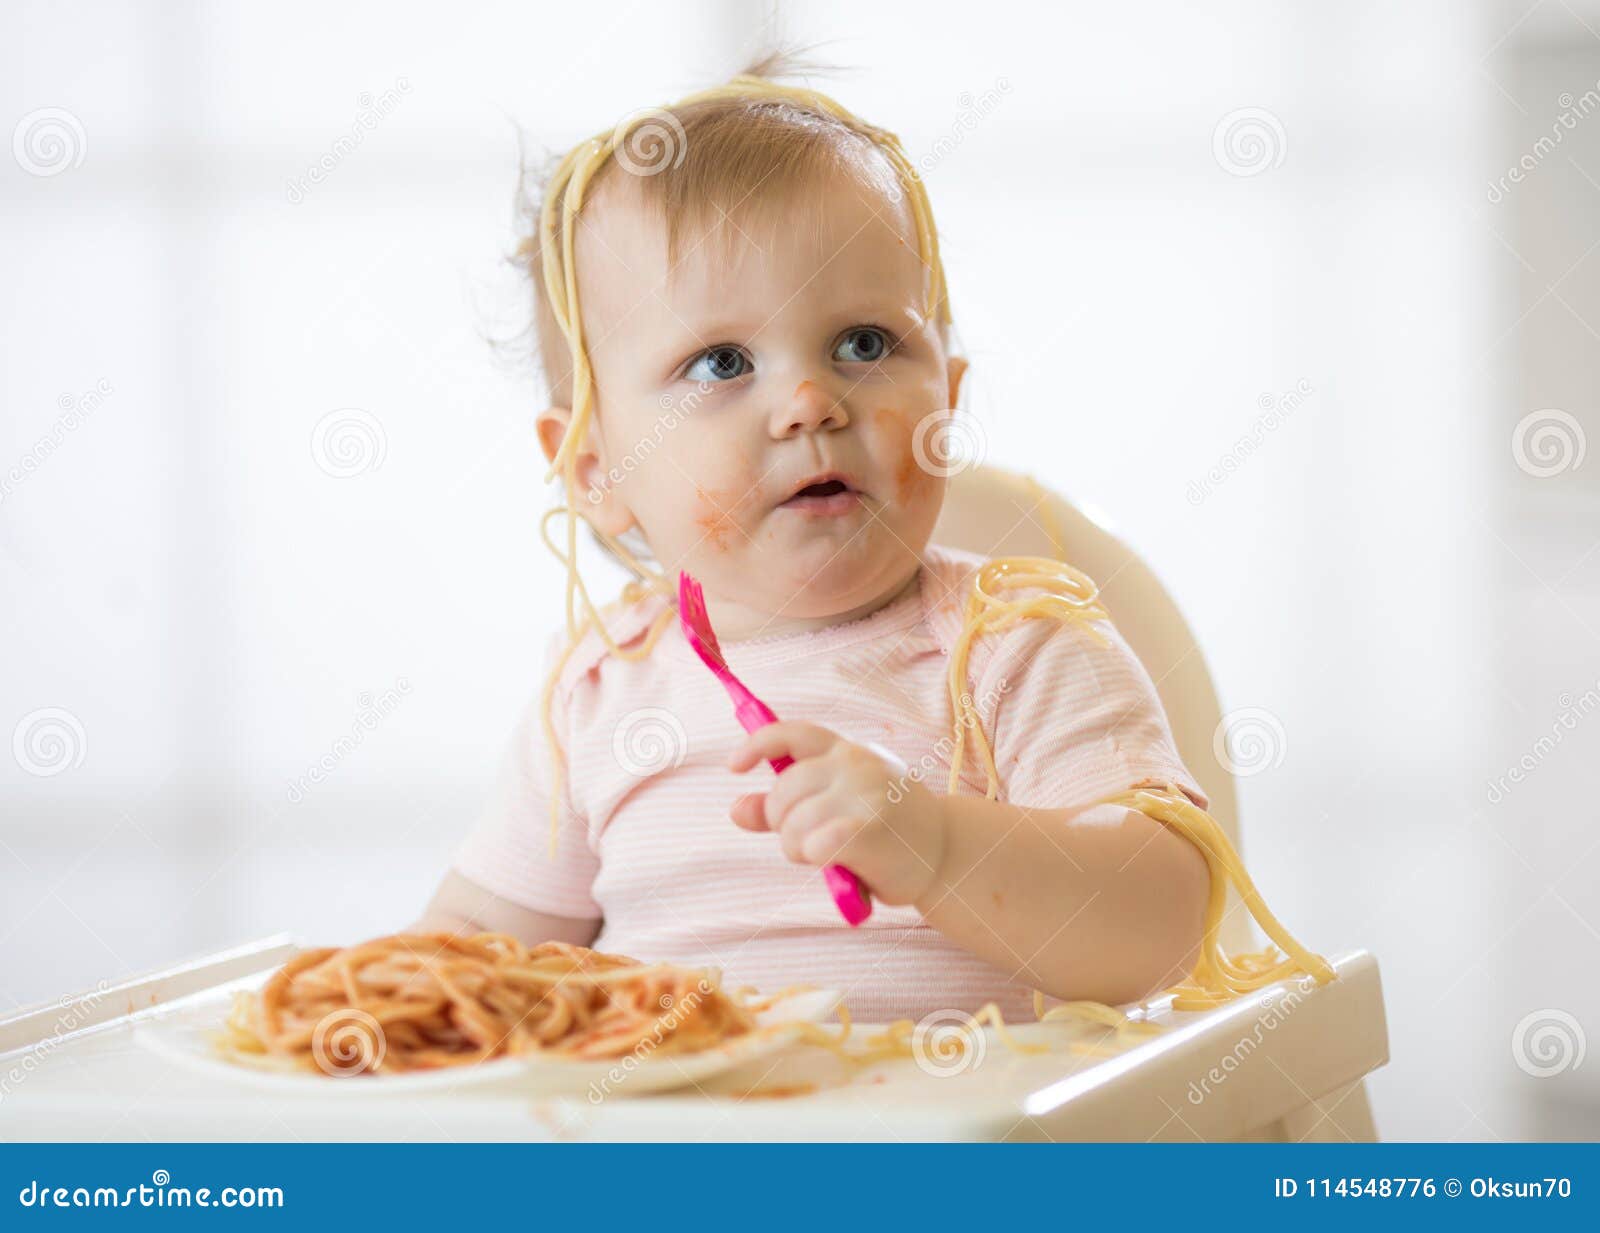 funny child eating noodle. grimy kid eats spaghetti with fork sitting on table at home